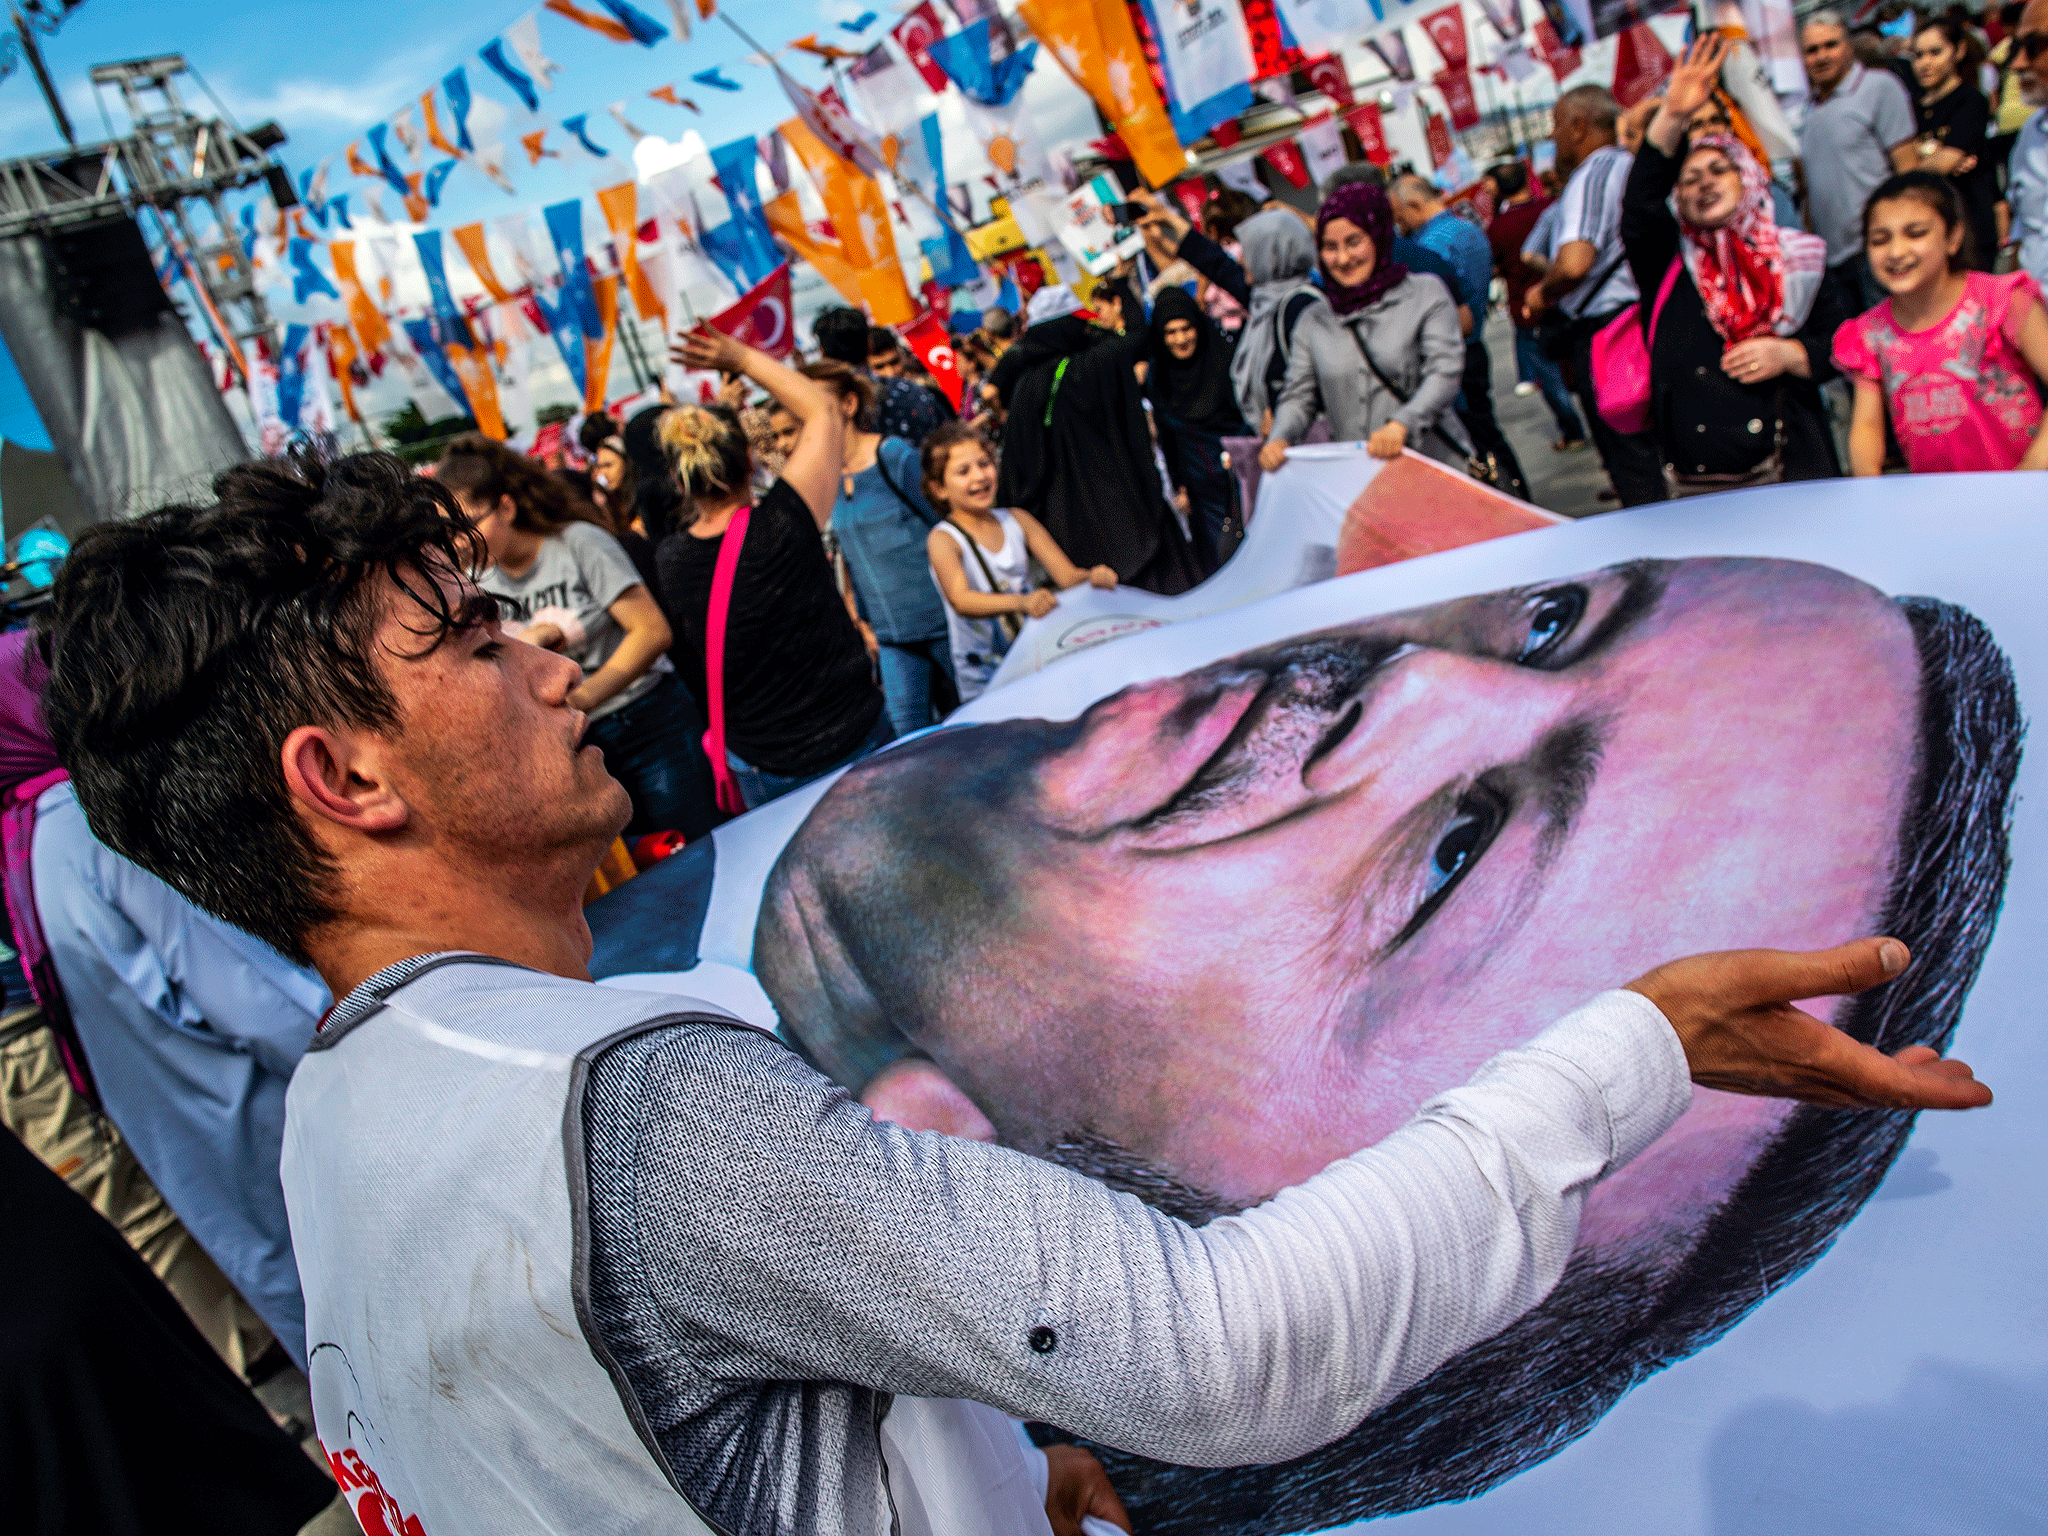 People wave a banner with a picture of Turkish President Recep Tayyip Erdogan during a gathering of supporters of his ruling Justice and Development Party (AKP) in Istanbul, Turkey, 19 June